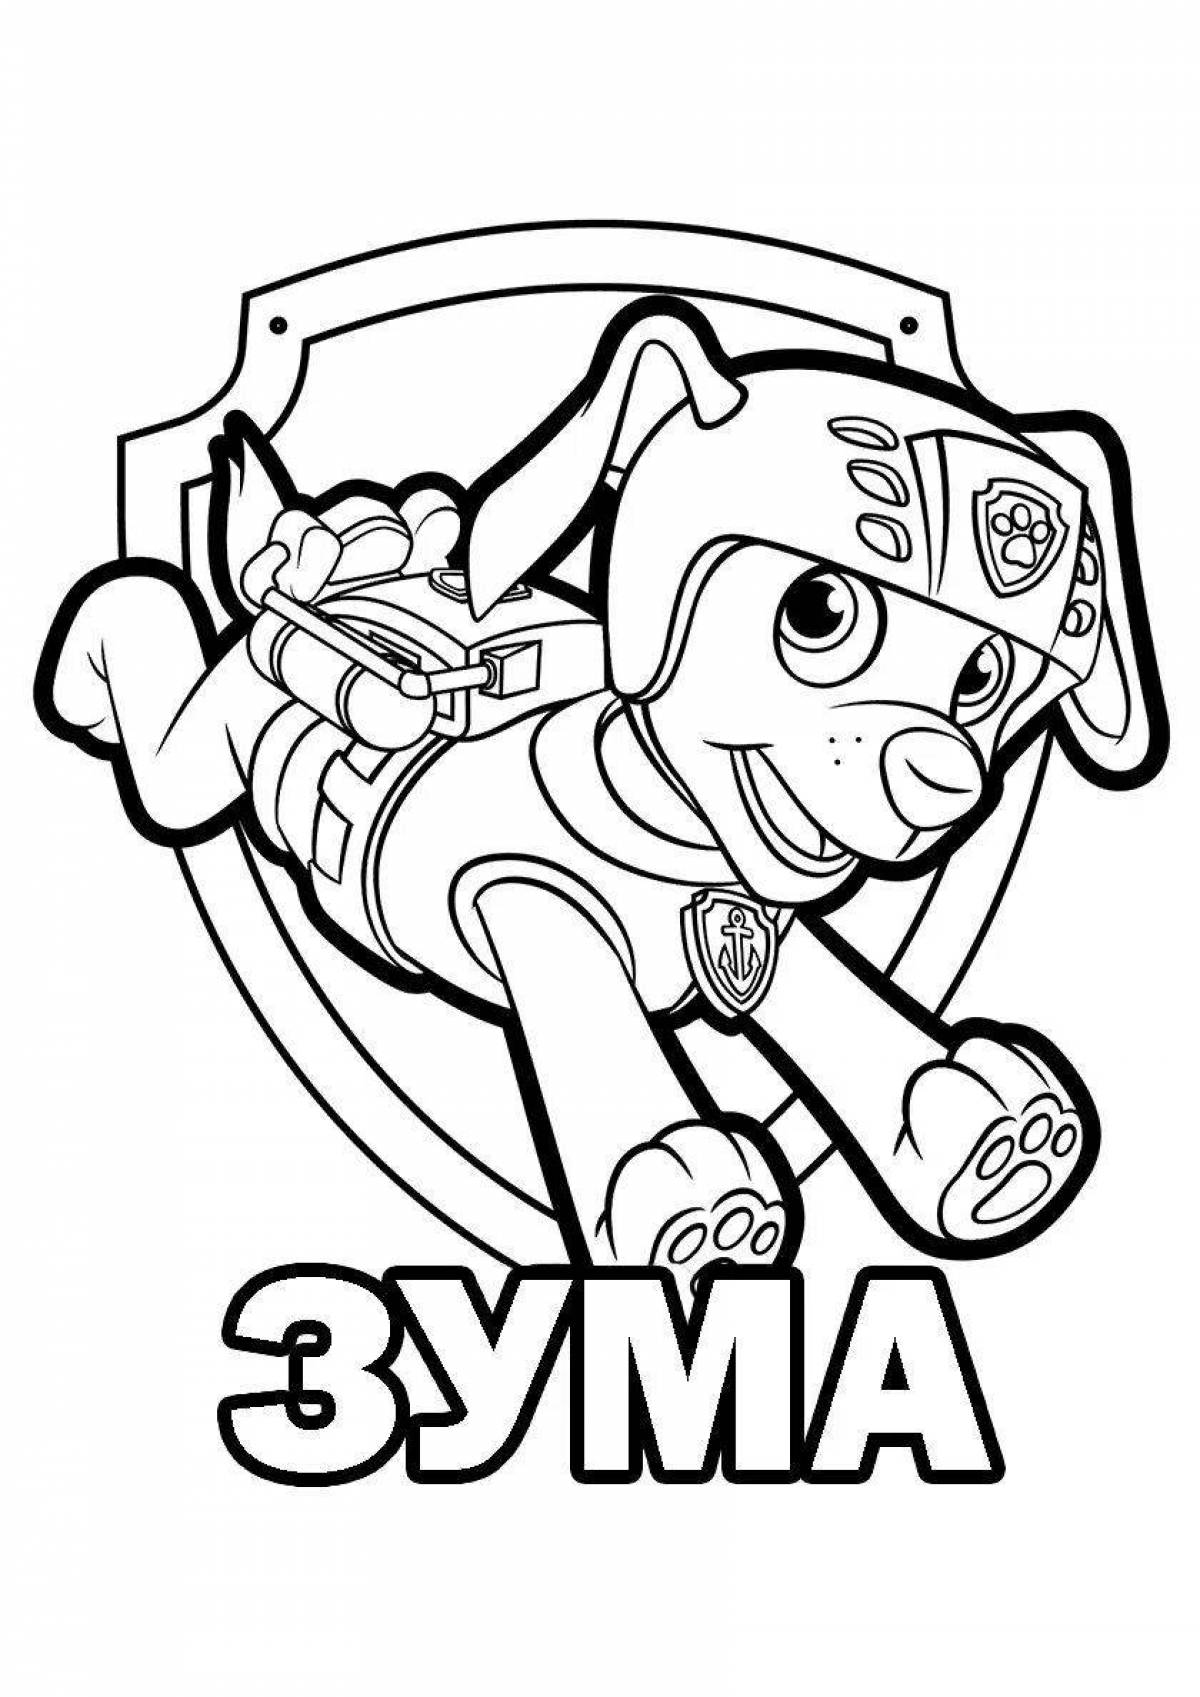 Wonderful coloring page paw patrol with cars